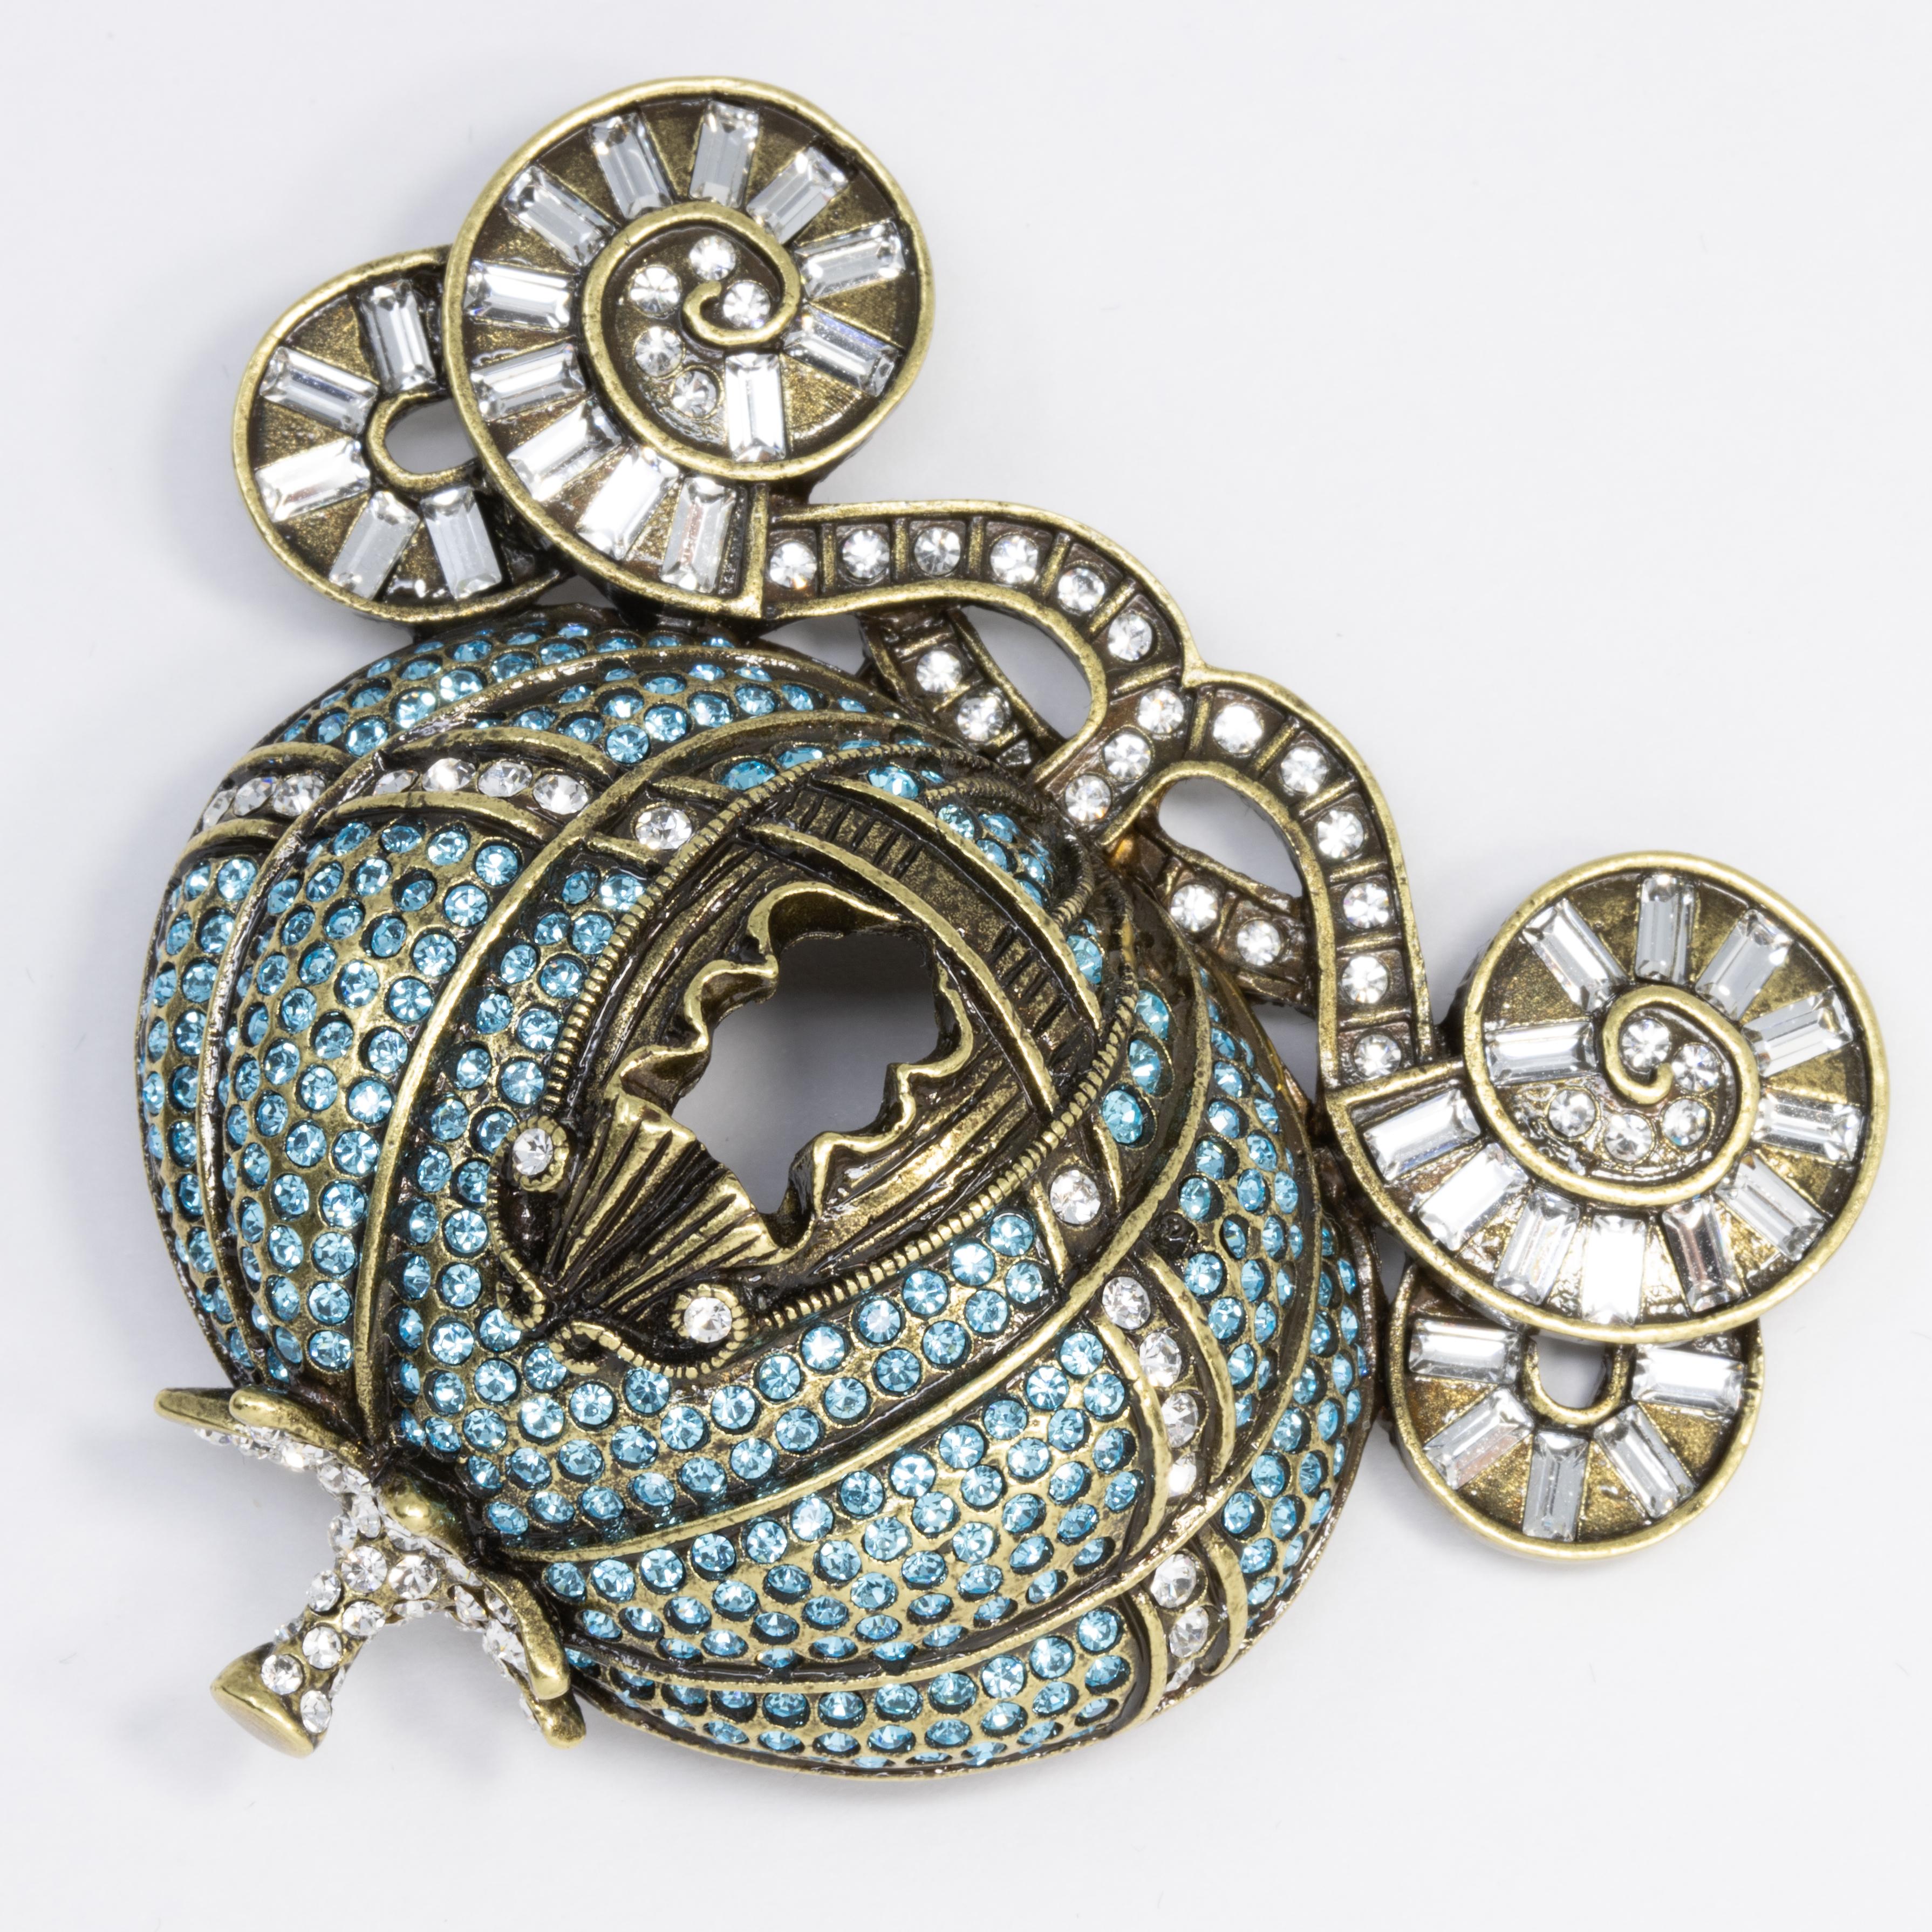 This sparkling pumpkin carriage pin is perfect for a fairy tale worthy ensemble. Cinderella inspired pin brooch from Heidi Daus.

Hallmarks: Heidi Daus, CN